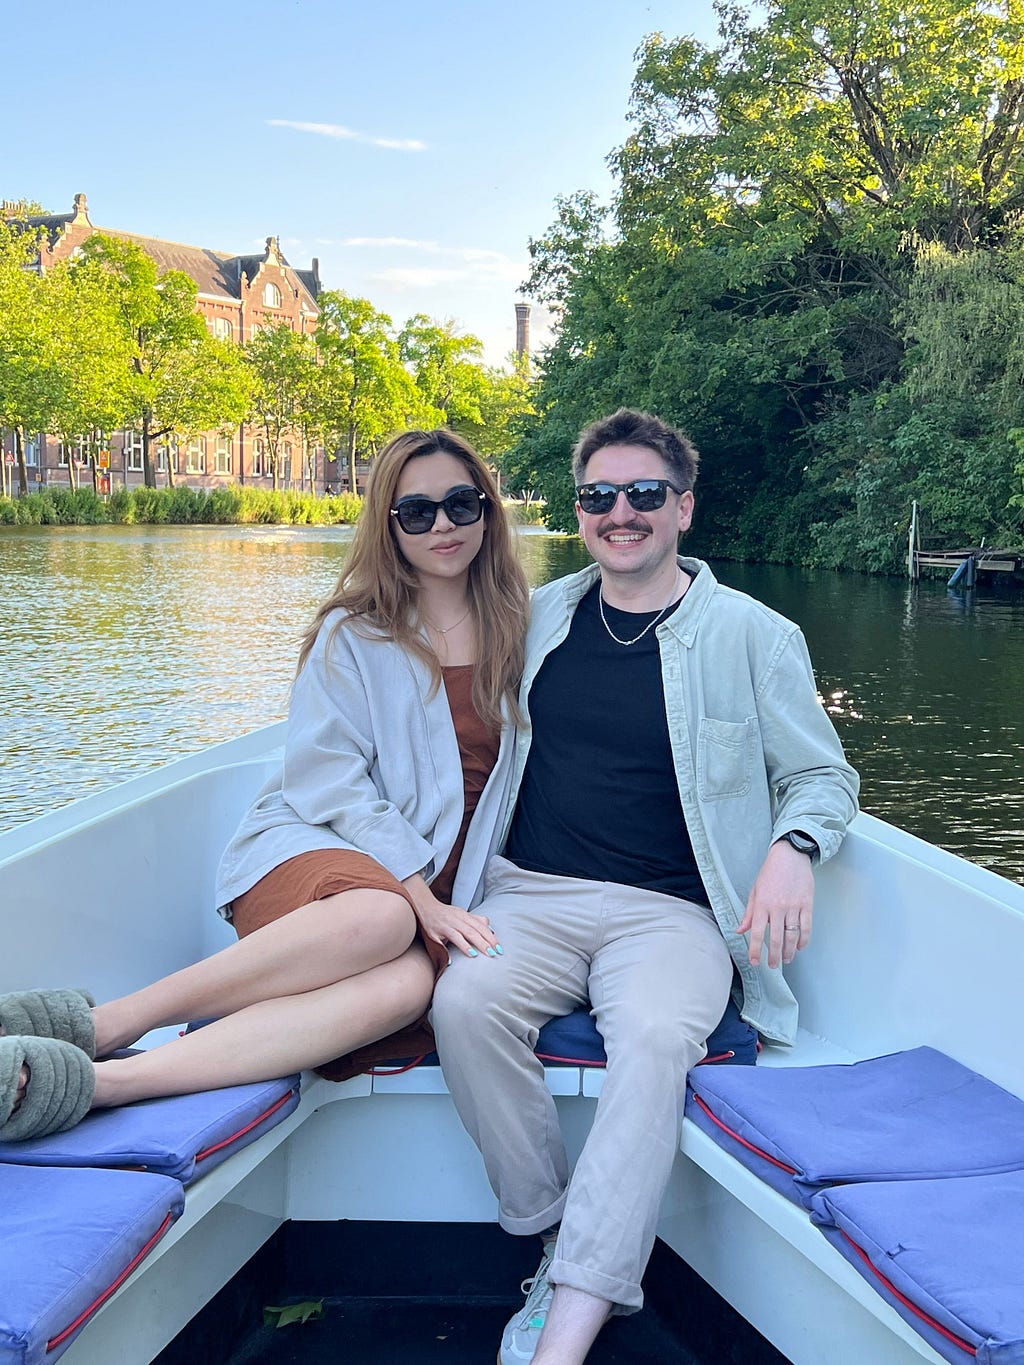 Michelle and husband on a canal cruise in Amsterdam